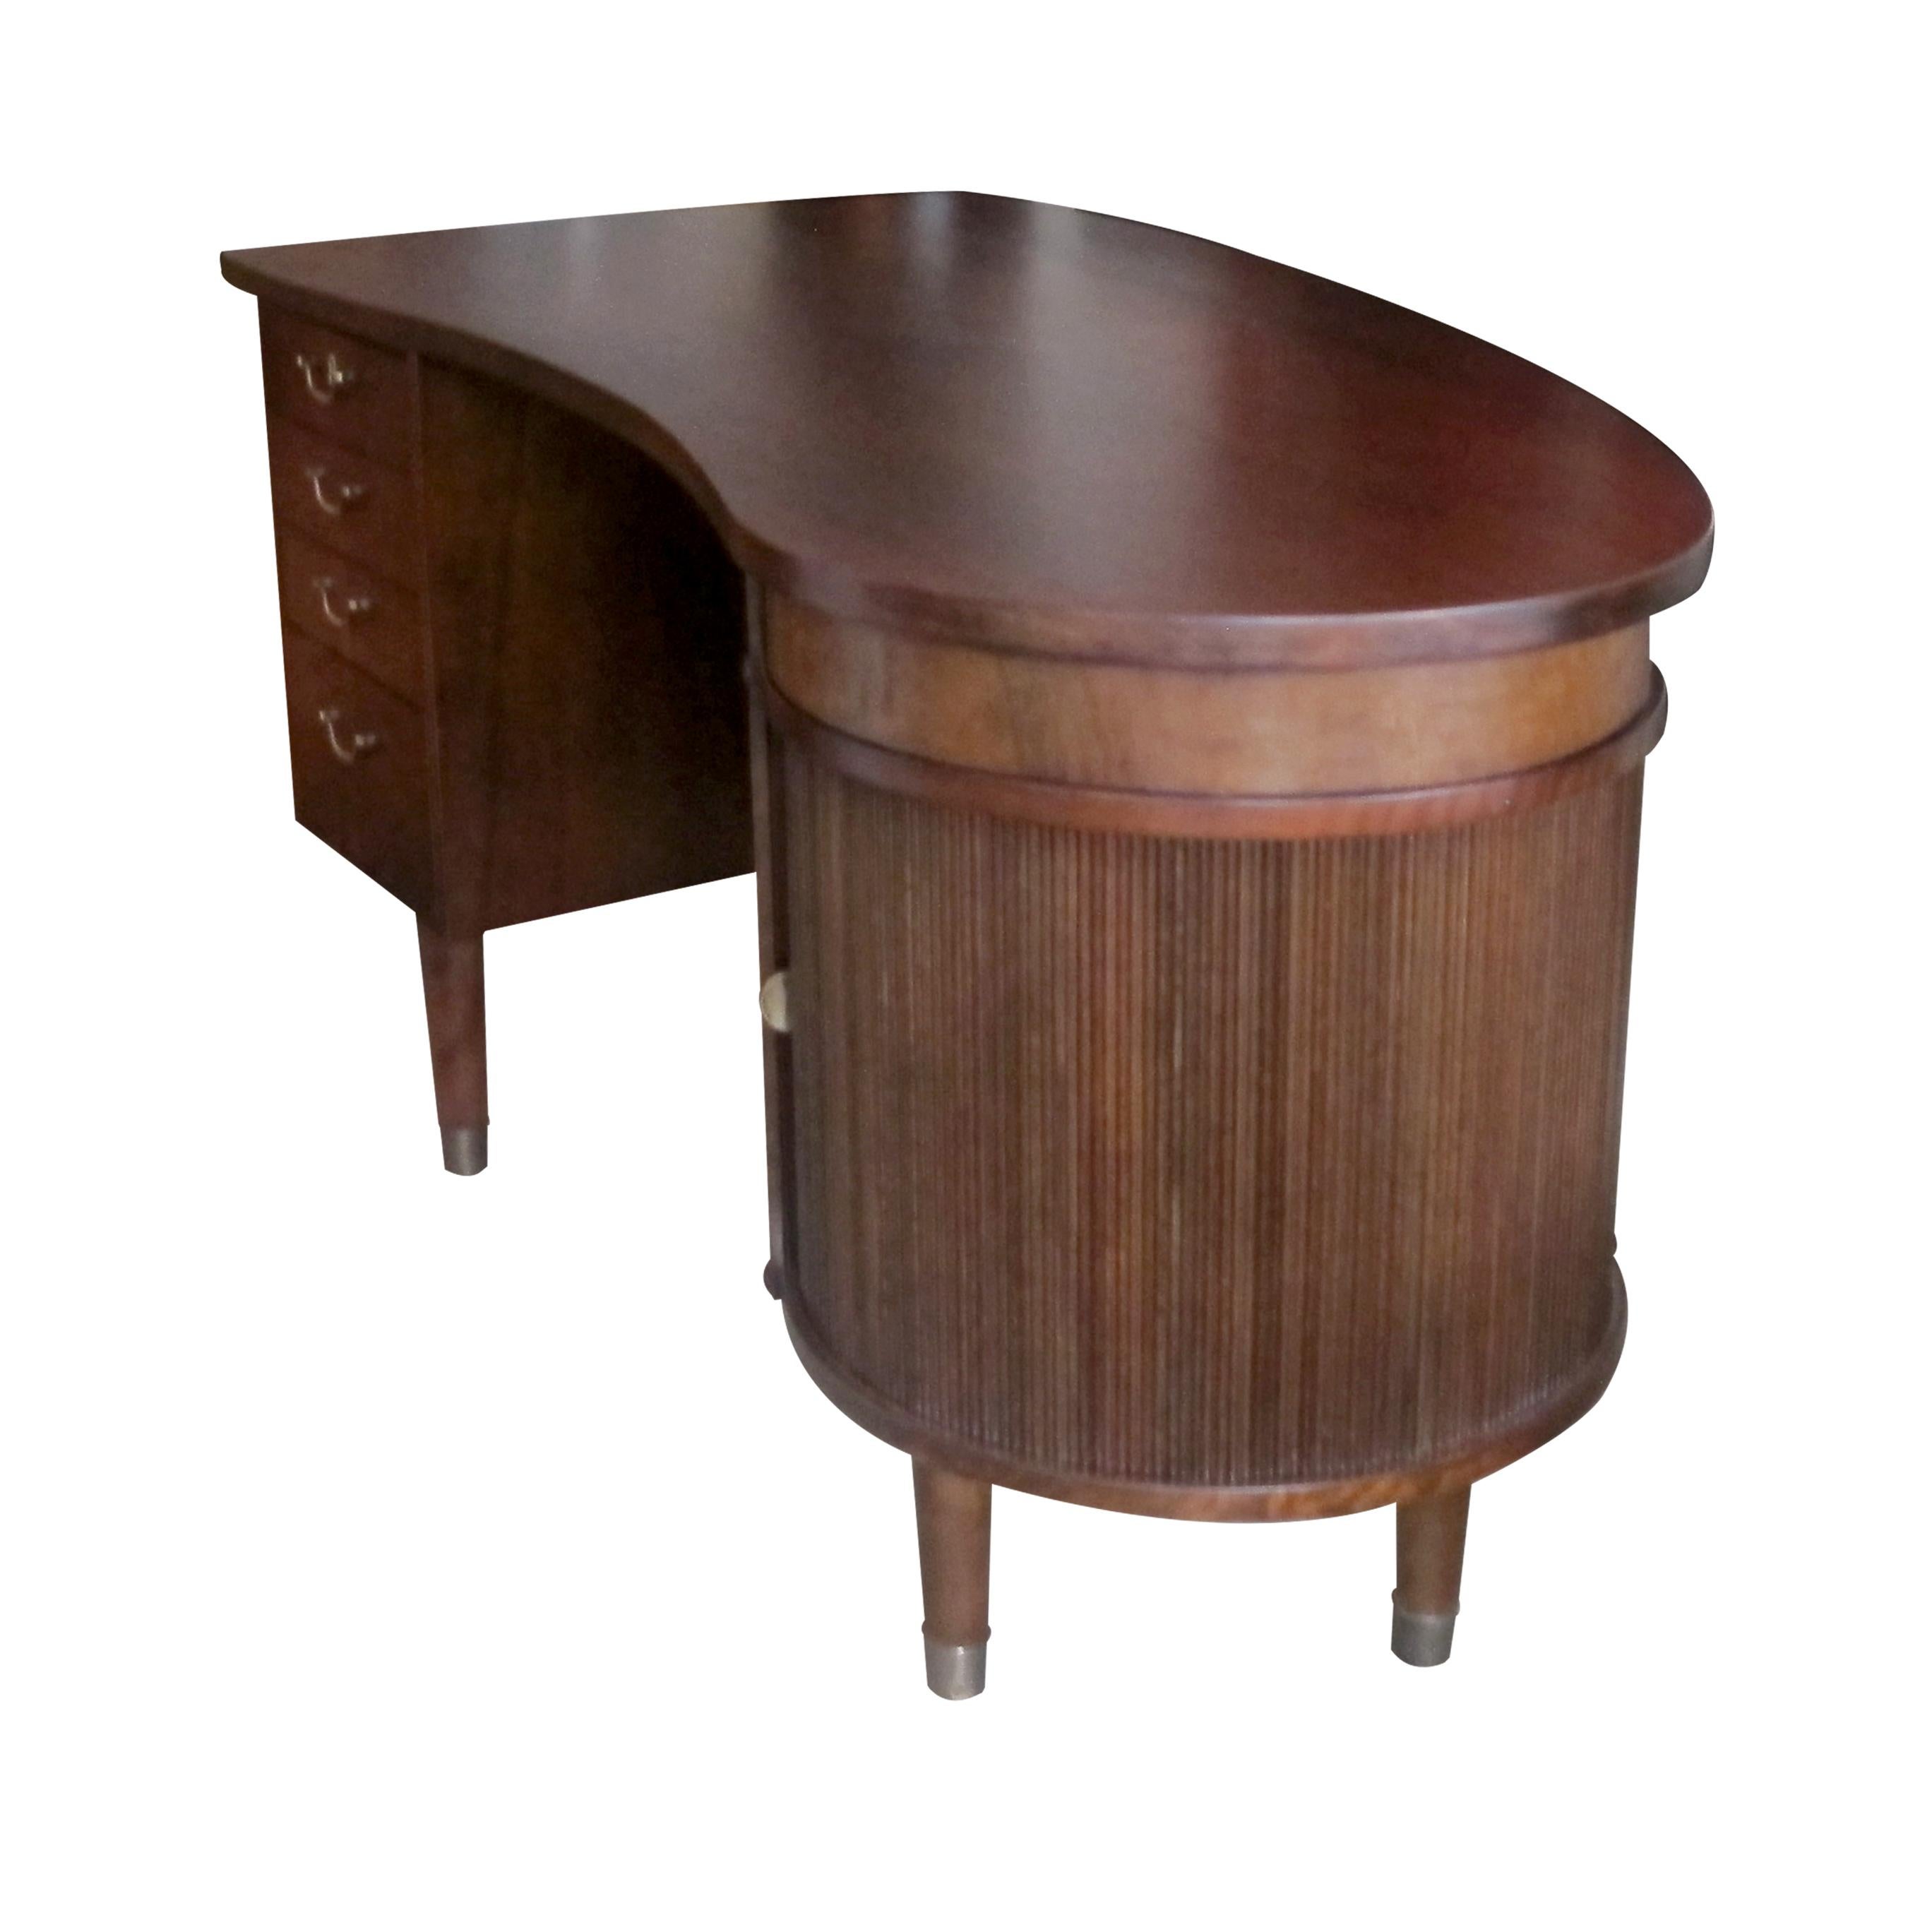 A beautiful, mid century, 1960s, mahogany writing desk designed by Kai Kristiansen and made by Feldballes Møbelfabrik. This kidney shaped desk is a real statement of elegance with generous curves and an interjection of straight lines. The front